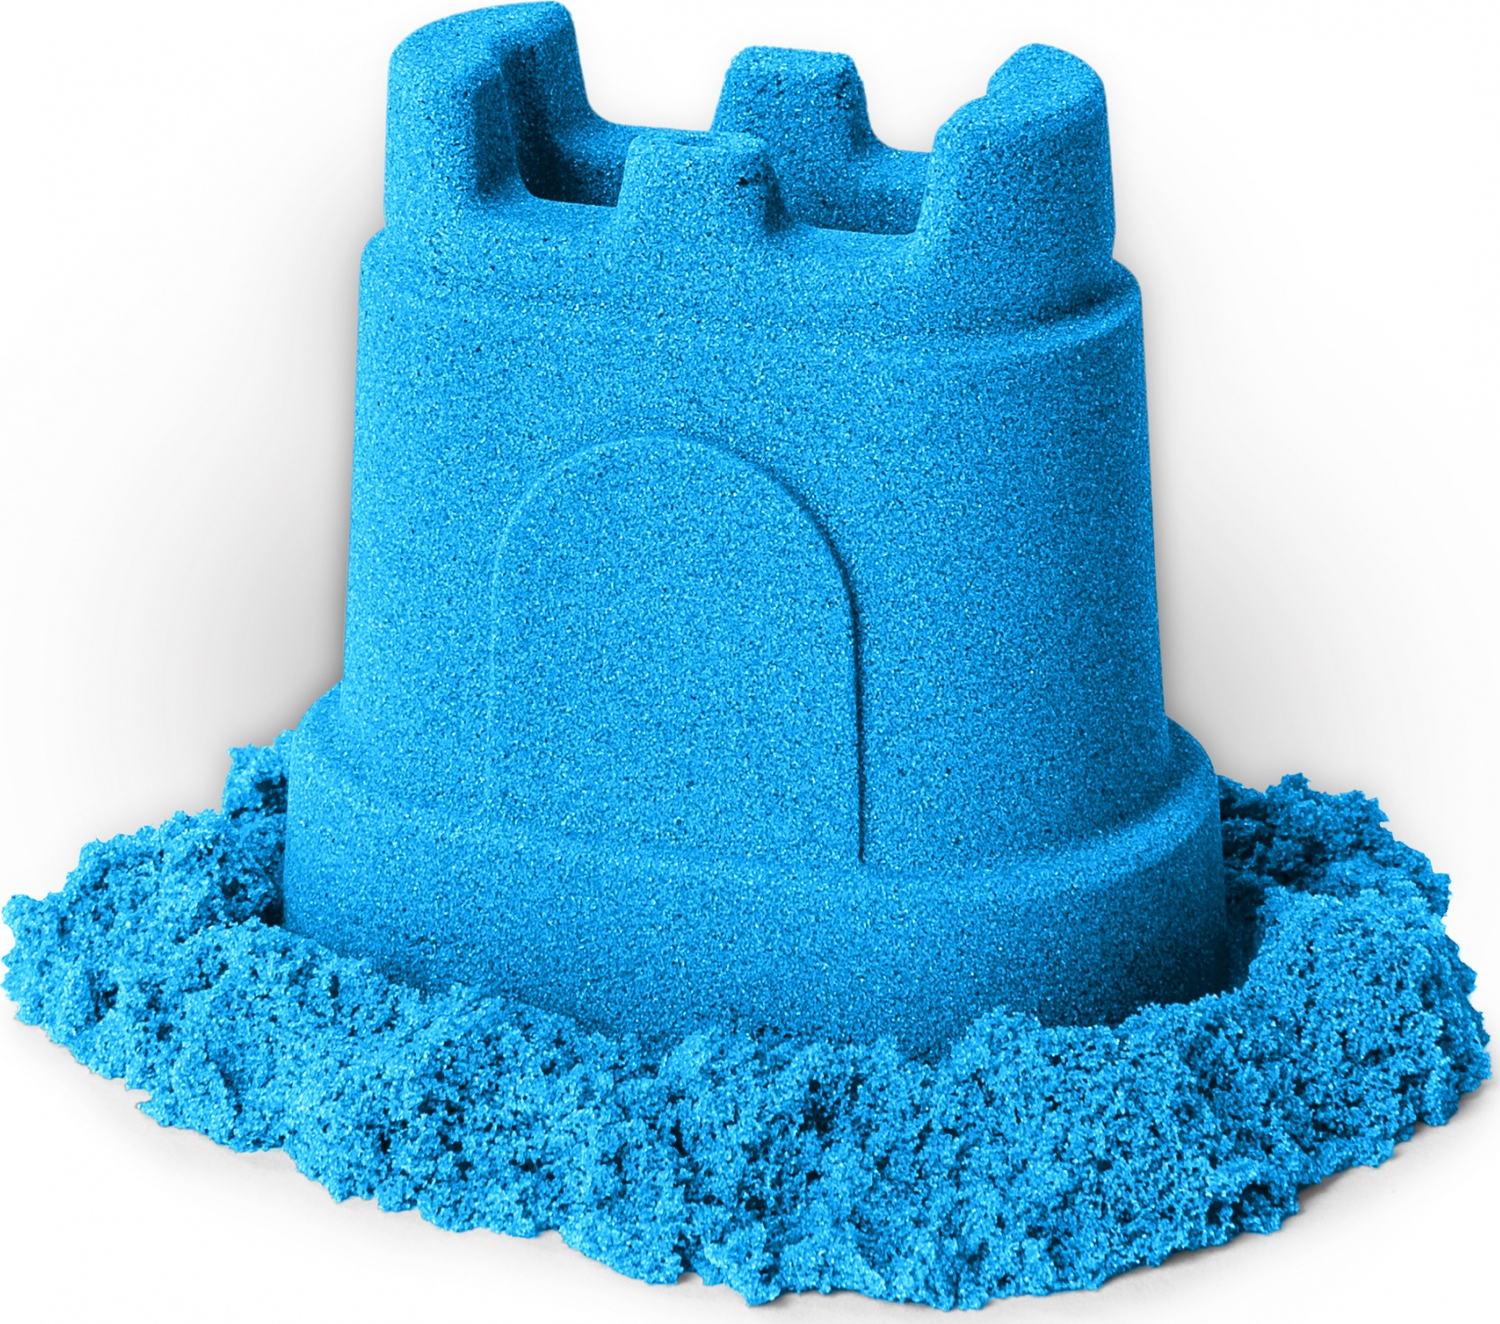 Kinetic Sand: Single Container Asst.